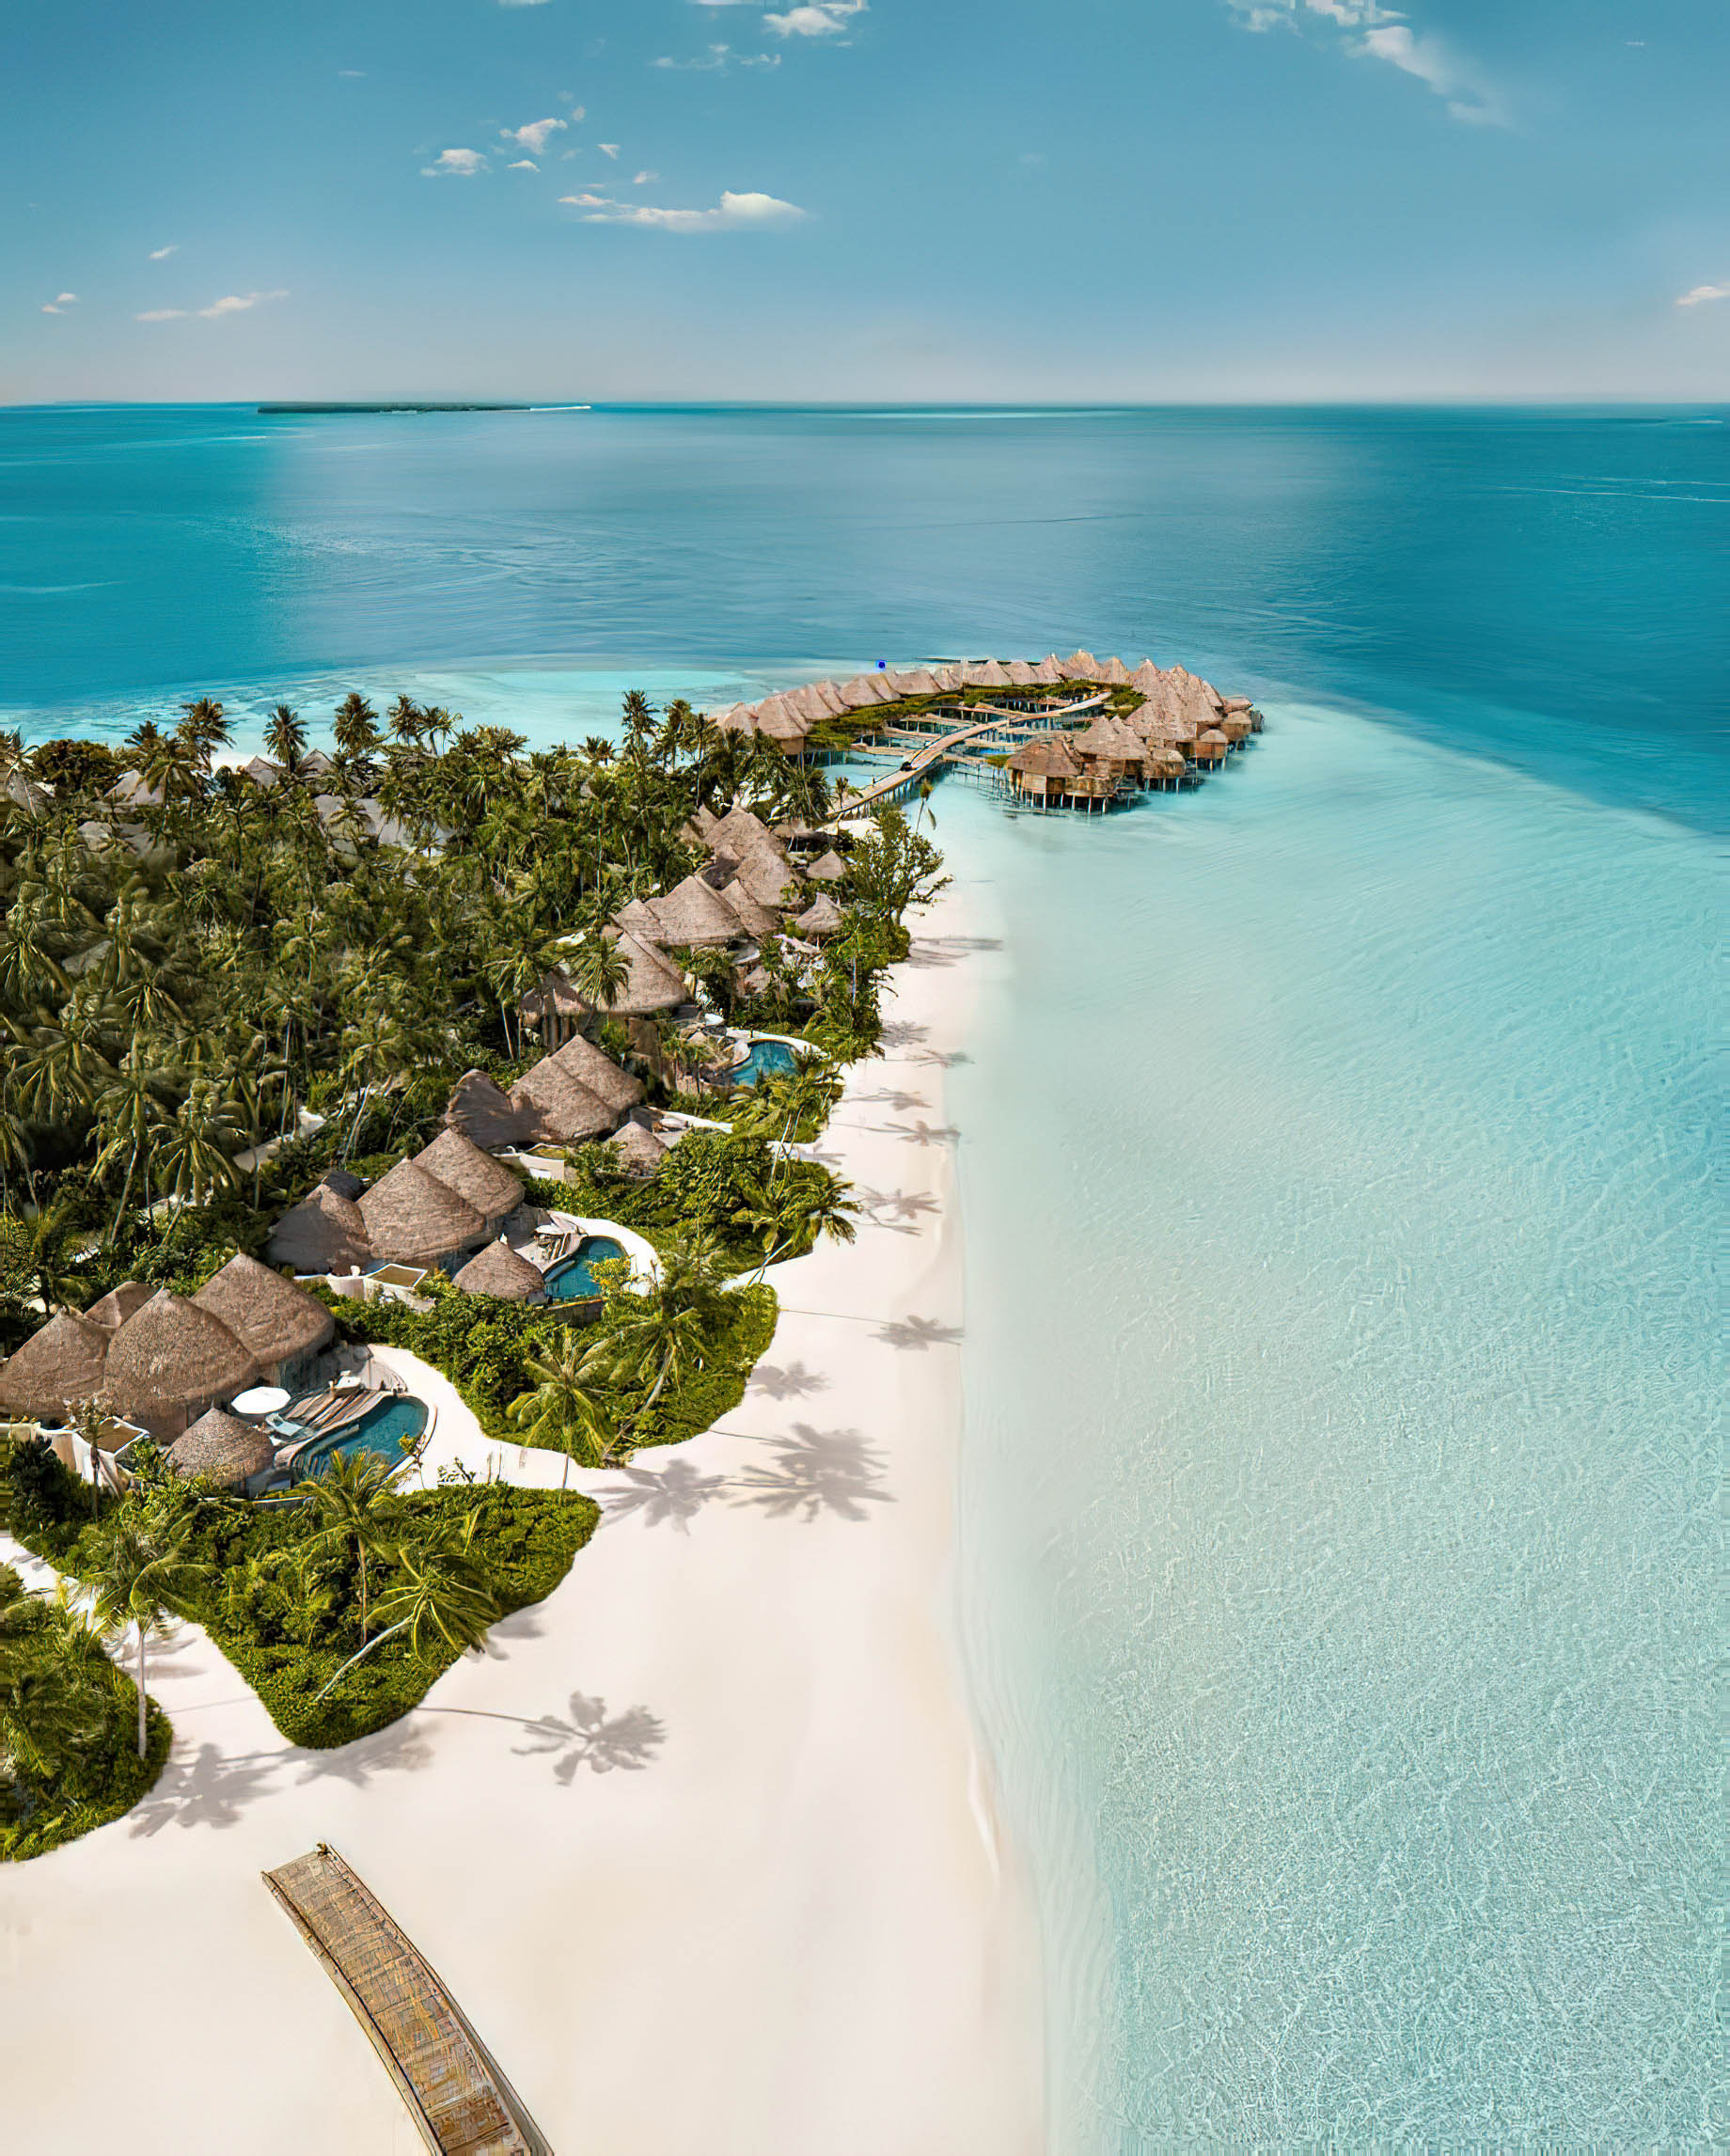 The Nautilus Maldives Resort – Thiladhoo Island, Maldives – Perched Over Turquoise Waters